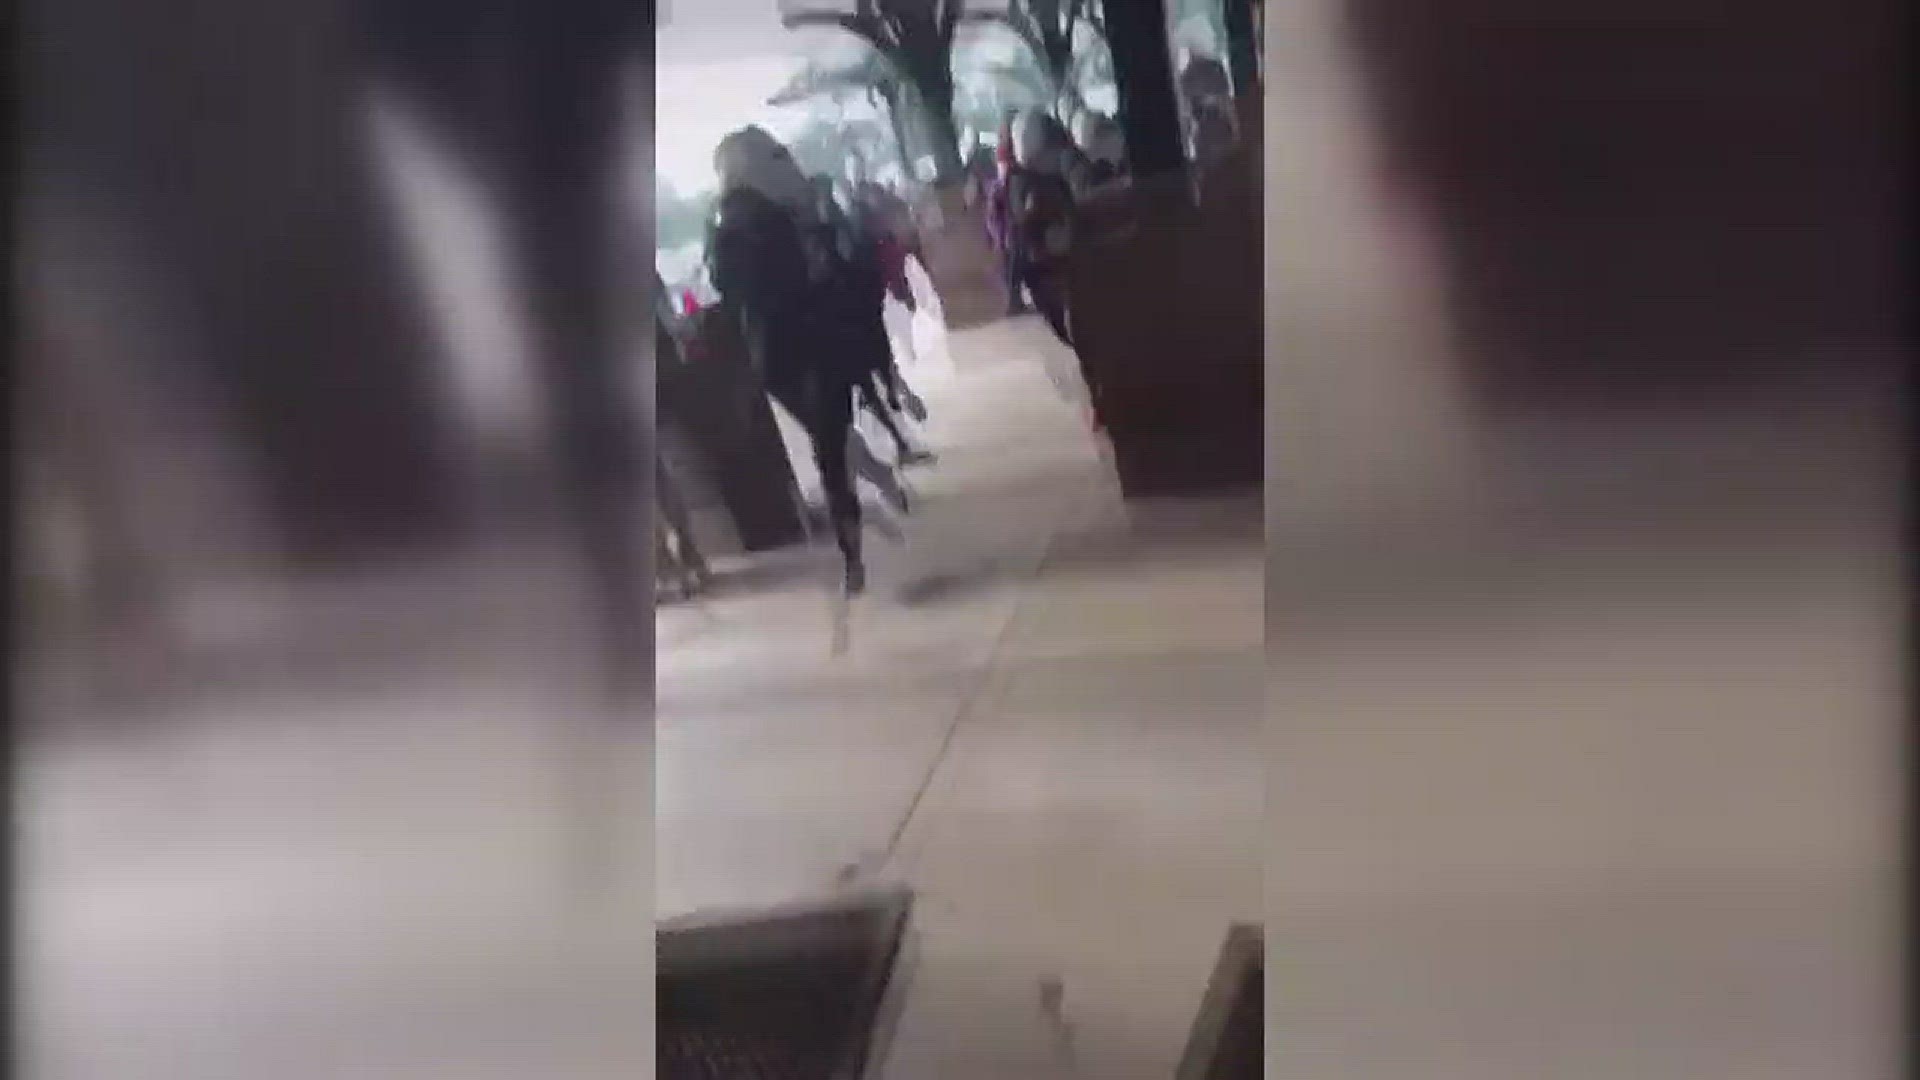 The following is video shot by a student at Baldwin County High School of a senior prank that resulted in 35 students being banned from graduation.